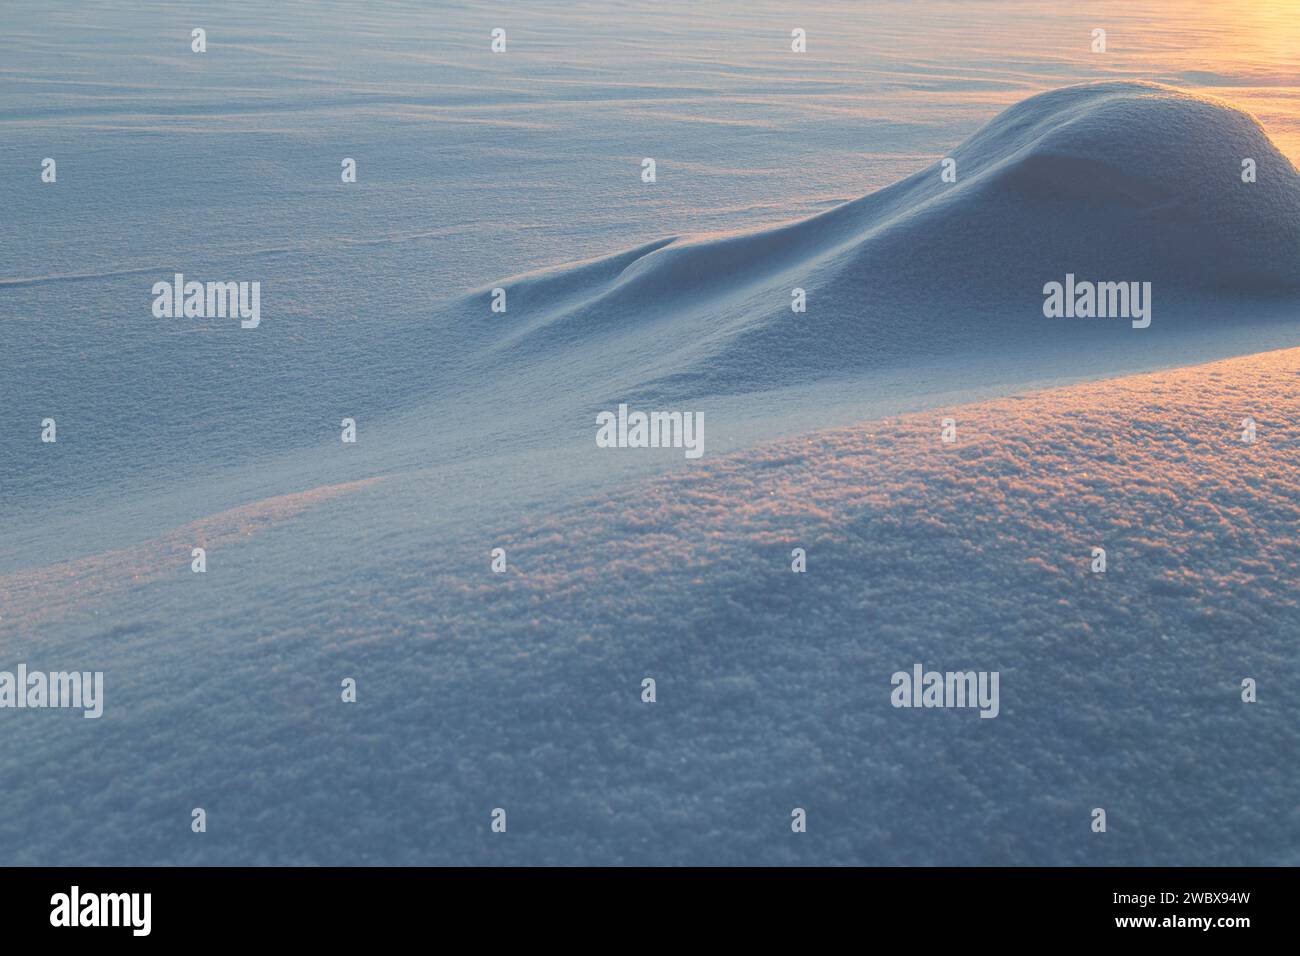 Landscape of fresh and clean snow on the ground and snowdrift at sunset. Good as a natural winter season background. Beautiful abstract snowy shapes. Stock Photo